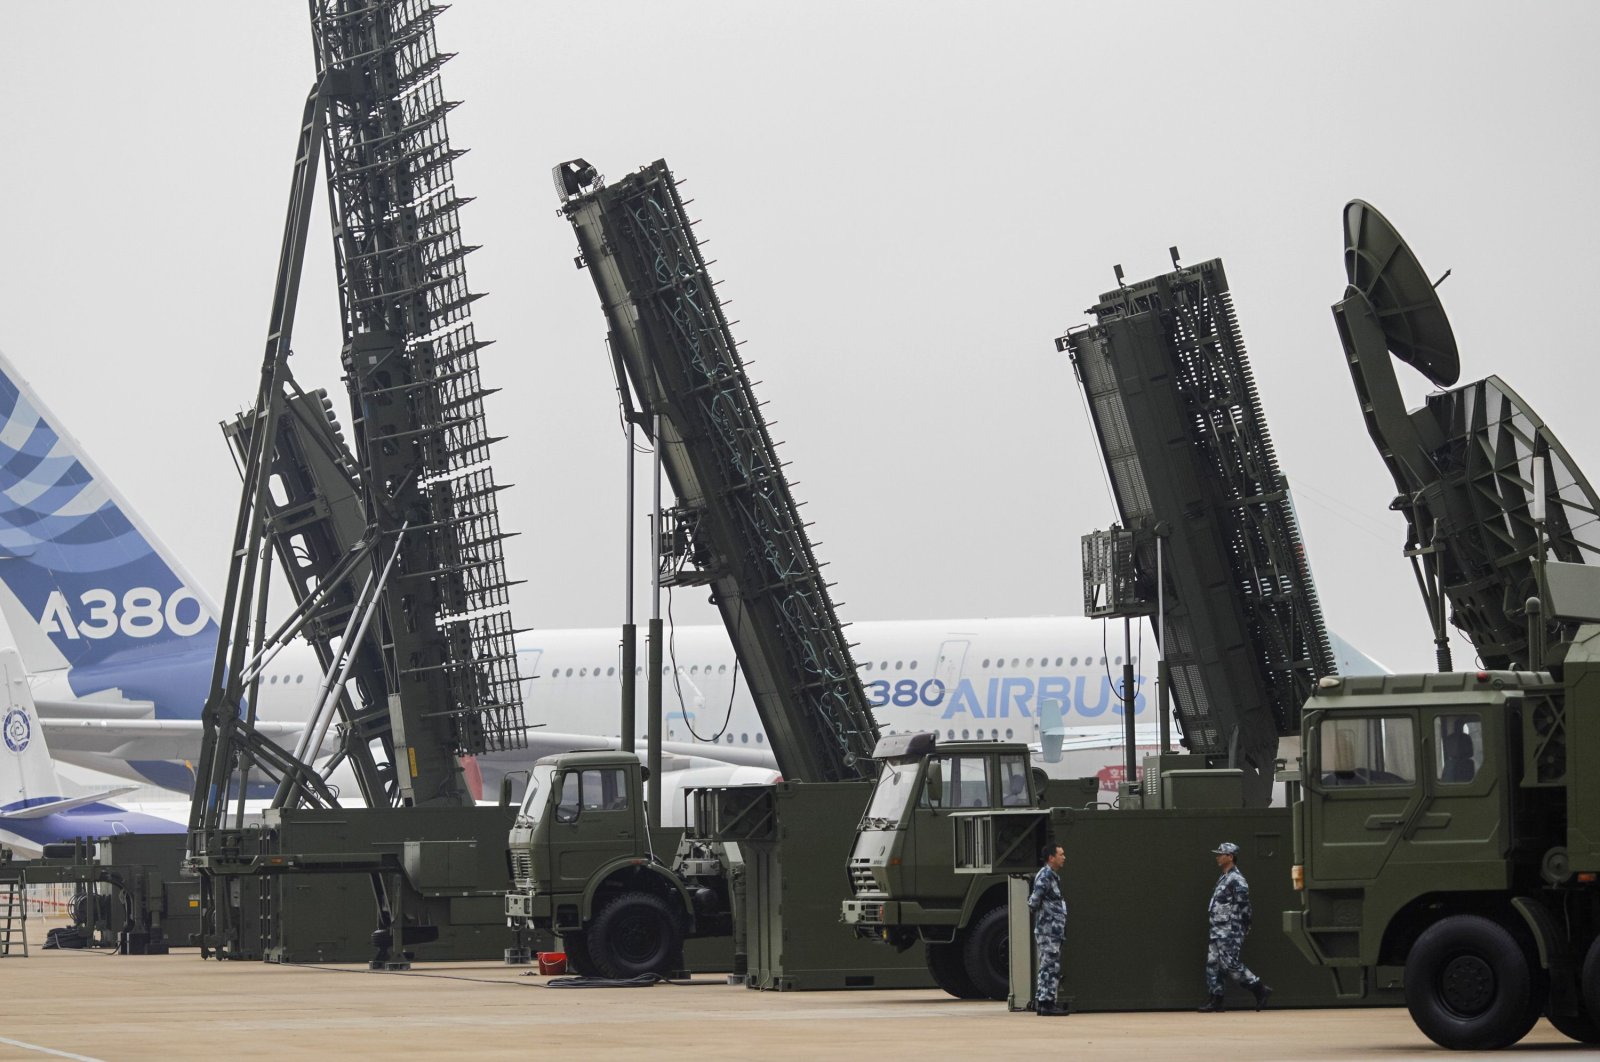 Chinese People's Liberation Army Air Force's anti-aircraft and ground-to-air missile systems are seen on display ahead of the 10th China International Aviation and Aerospace Exhibition in Zhuhai, Guangdong Province, Nov. 10, 2014. (Reuters Photo)